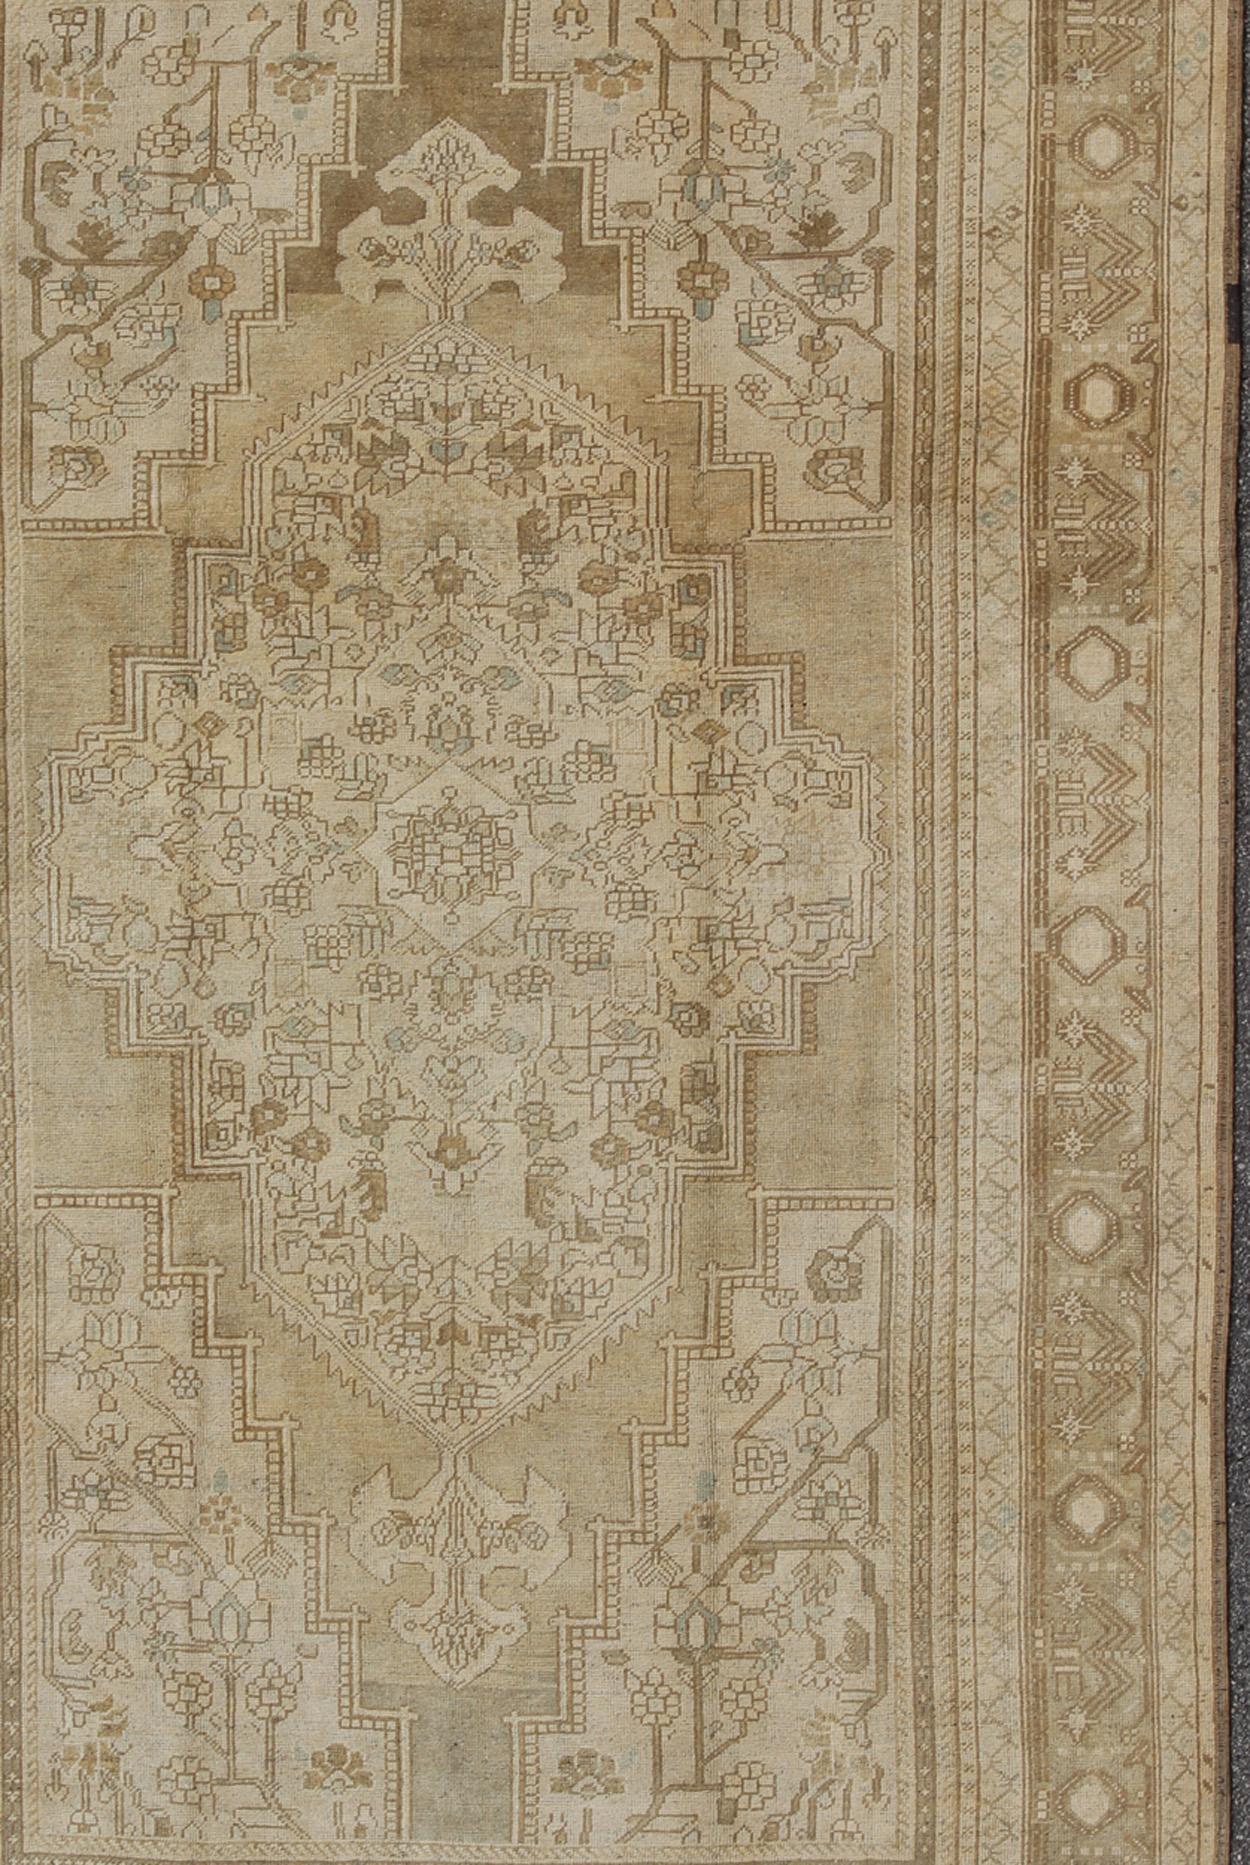 Measures: 7'3 x 13'

This muted Turkish Oushak features a light khaki border and background with shades of beige. The corners and central medallion are composed of a light camel and very subtle blue accents within floral motifs decorating the field